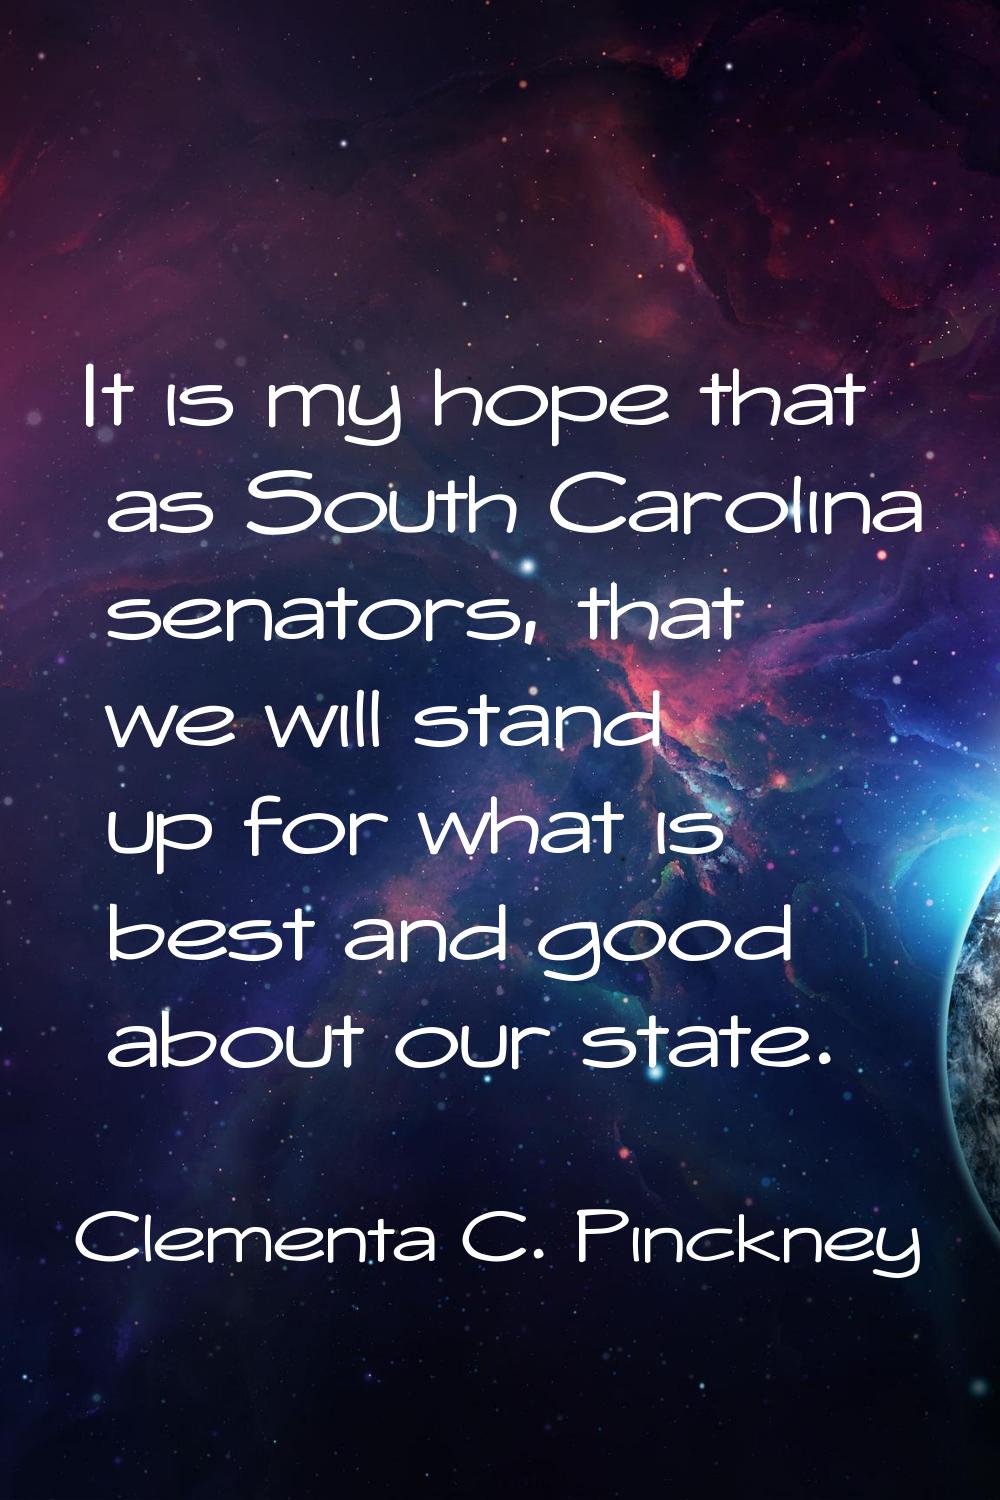 It is my hope that as South Carolina senators, that we will stand up for what is best and good abou